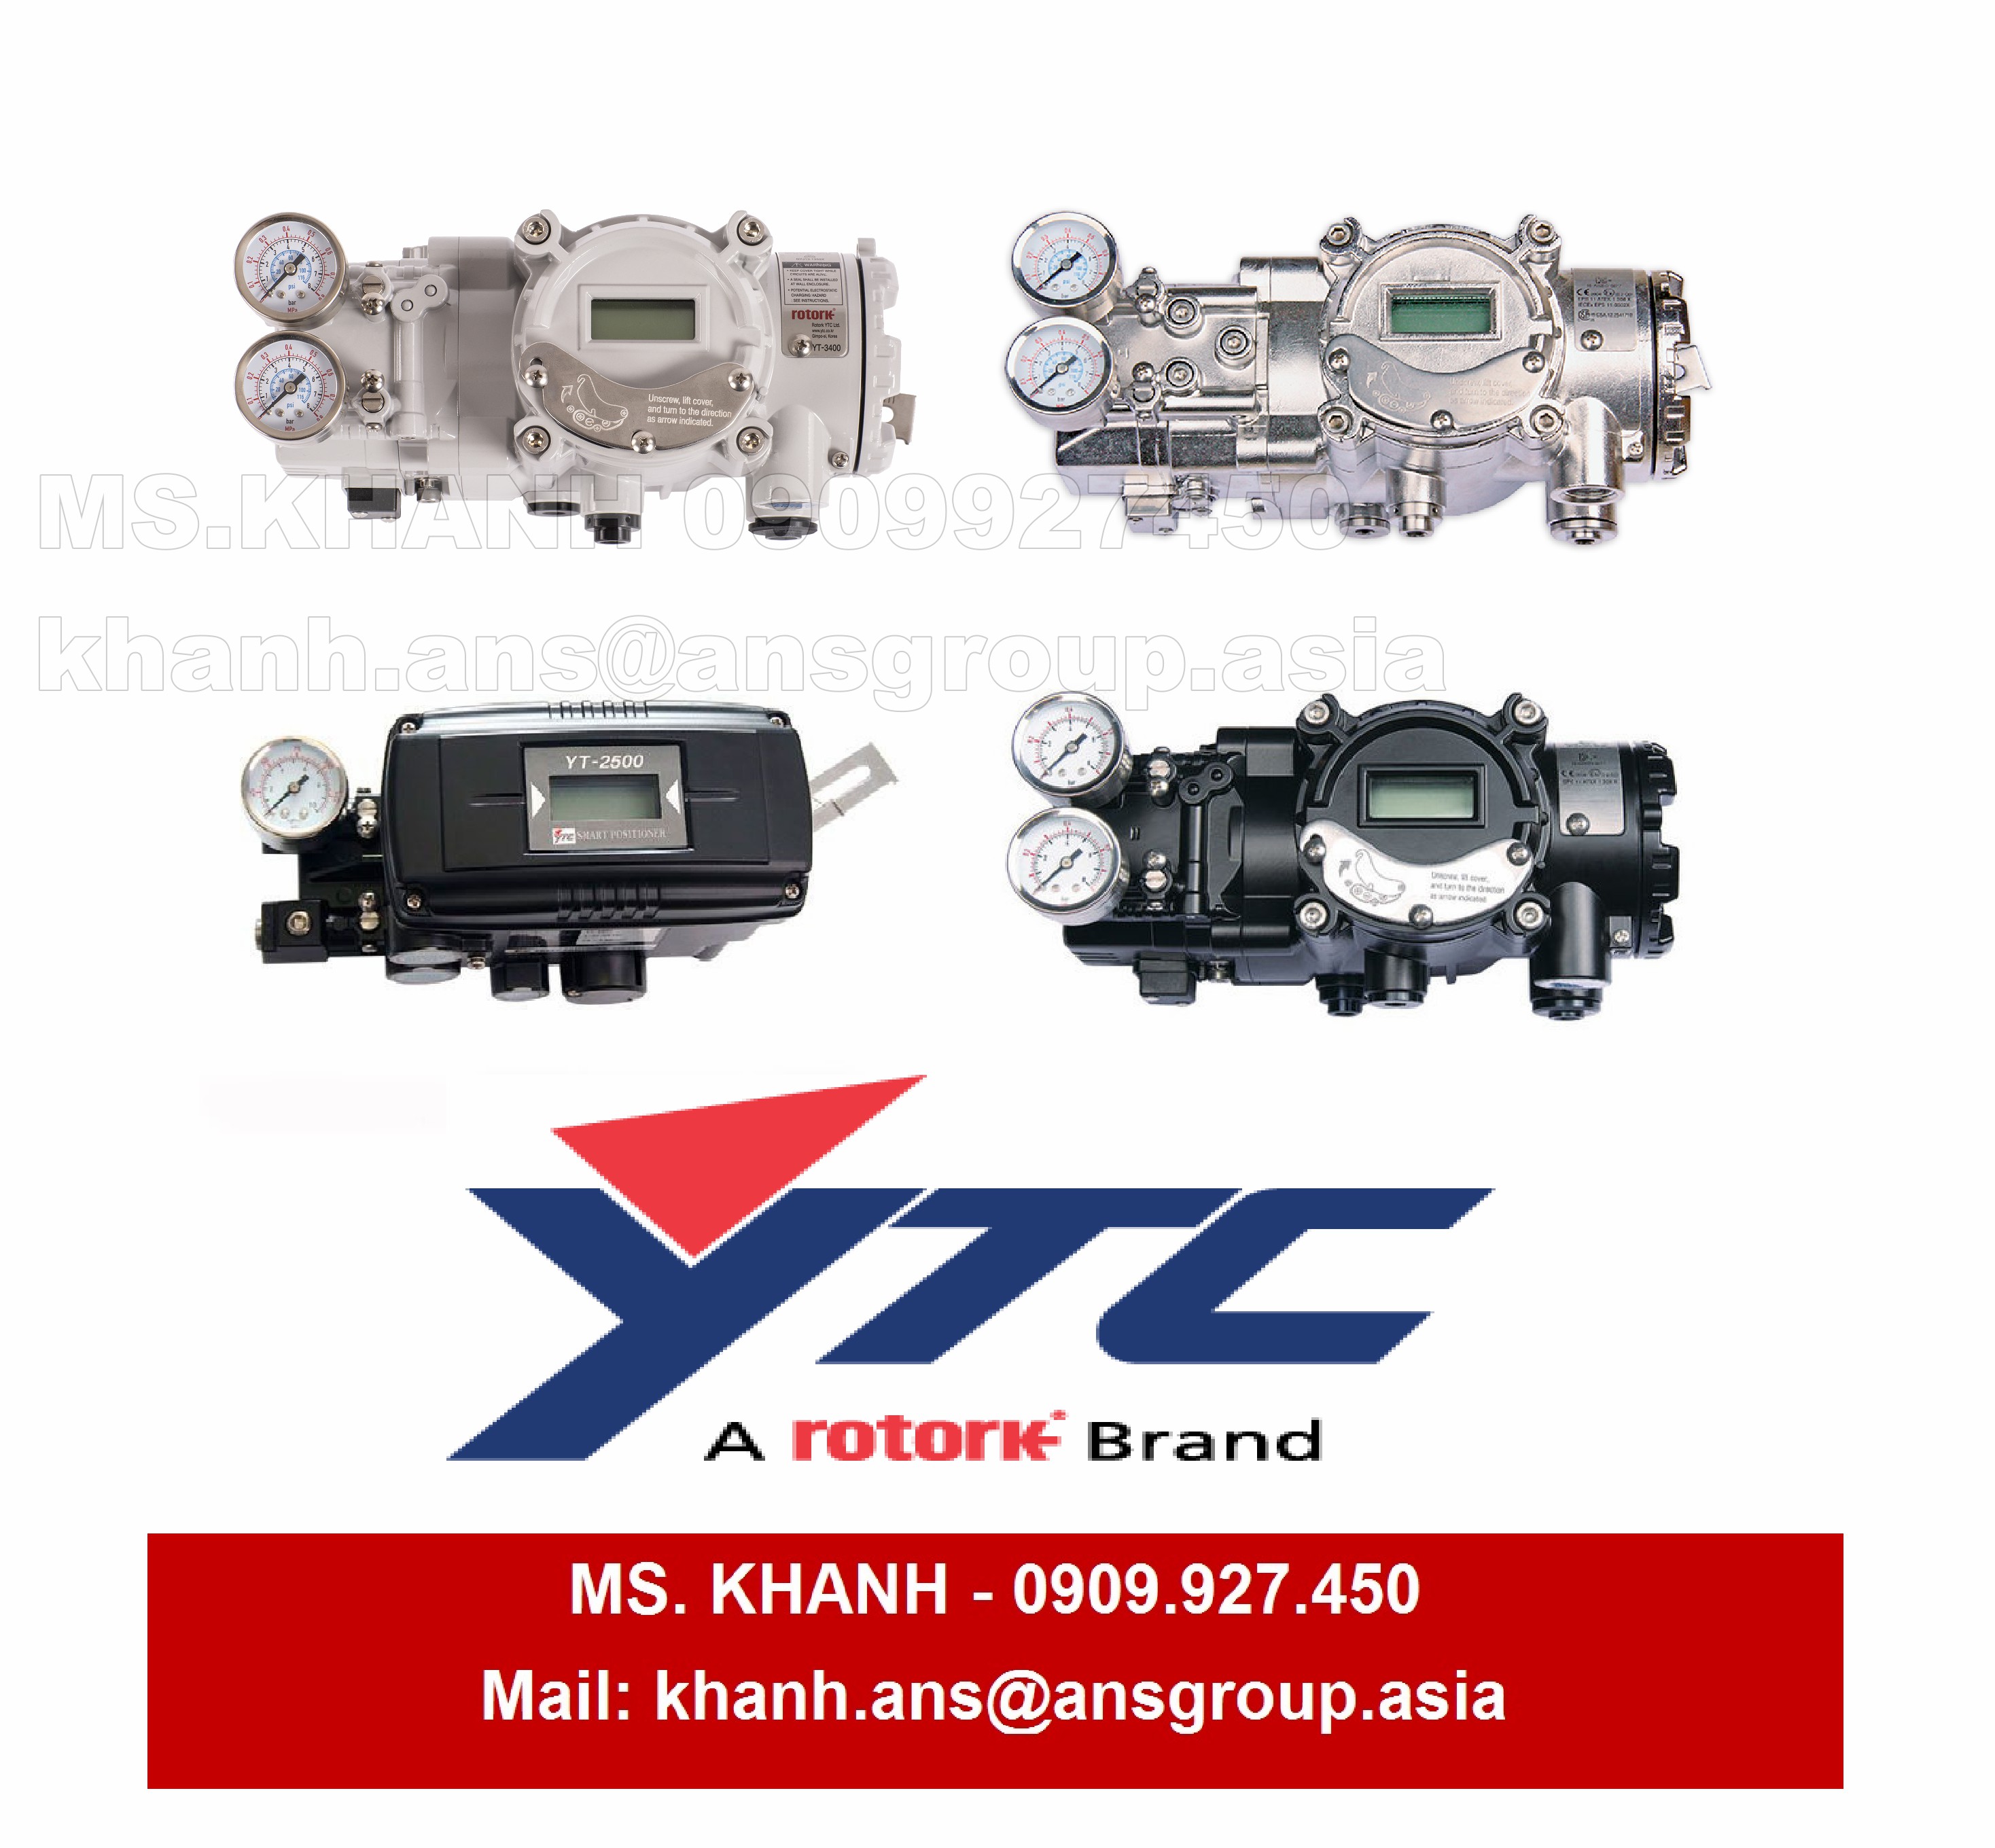 cong-tac-rompak4-f10-400-3-50-actuator-without-torque-switch-wiring-diagram-r200-100-rotork-vietnam-1.png